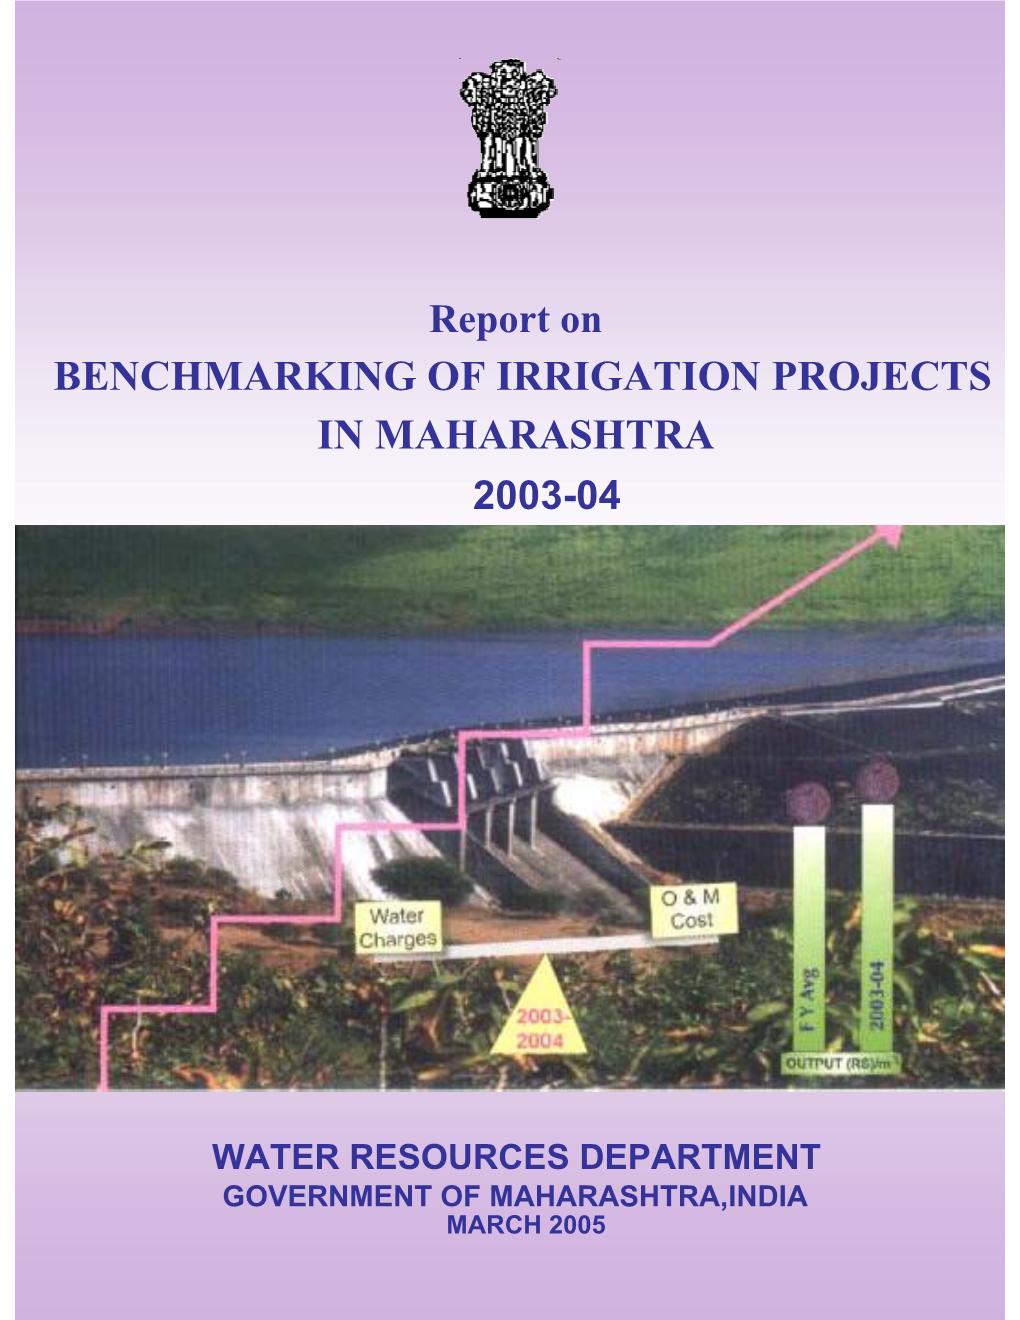 Benchmarking of Irrigation Projects in Maharashtra 2003-04